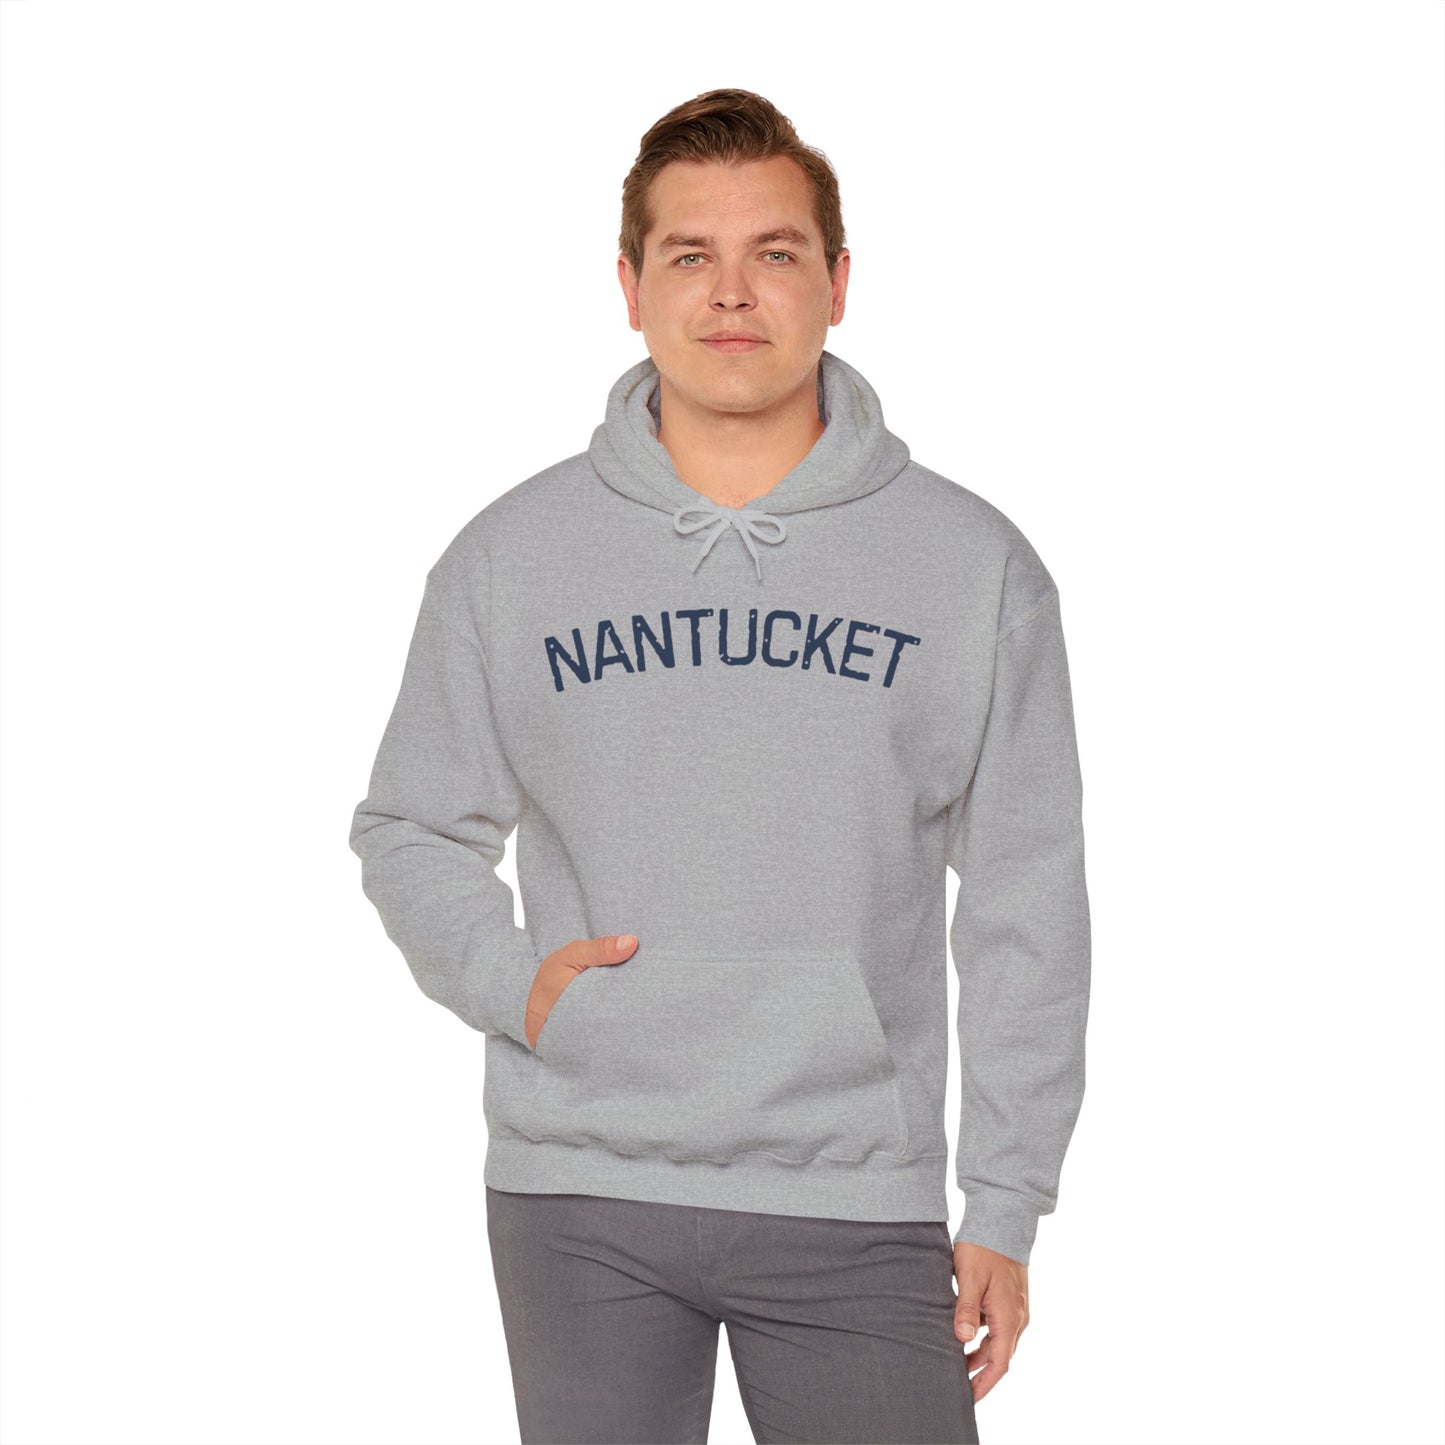 Nantucket Essential Cozy Hoodie - Unisex, Cotton-Poly Blend for Ultimate Comfort